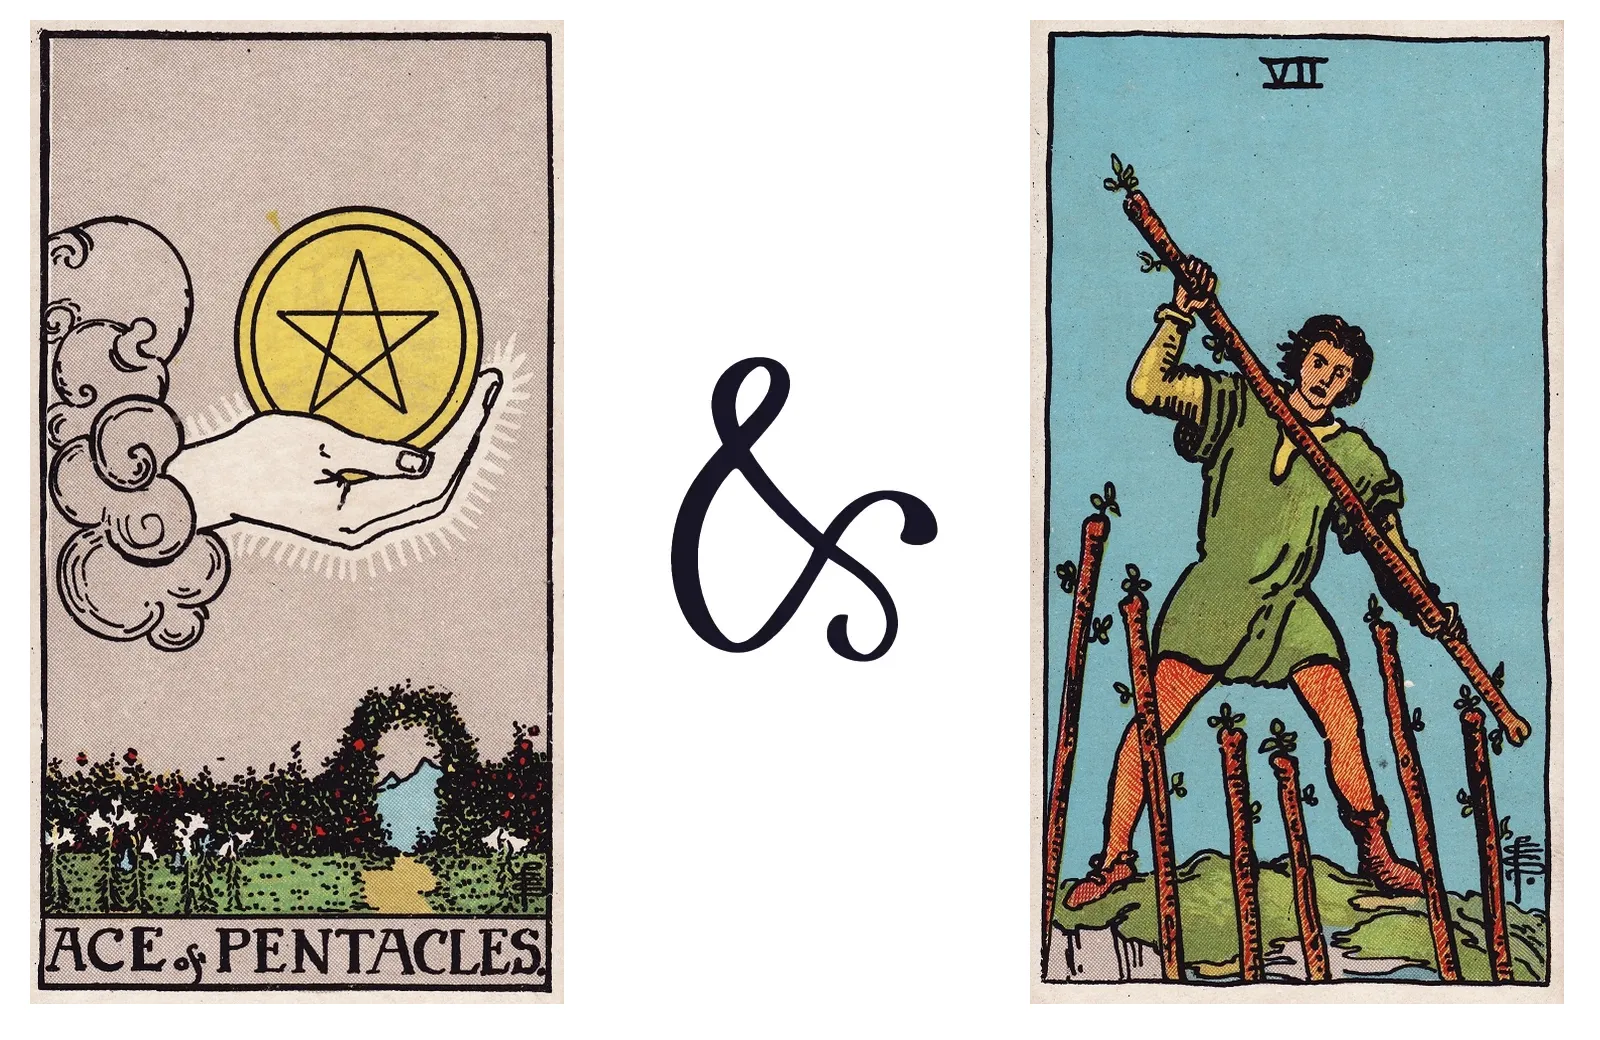 Ace of Pentacles and Seven of Wands